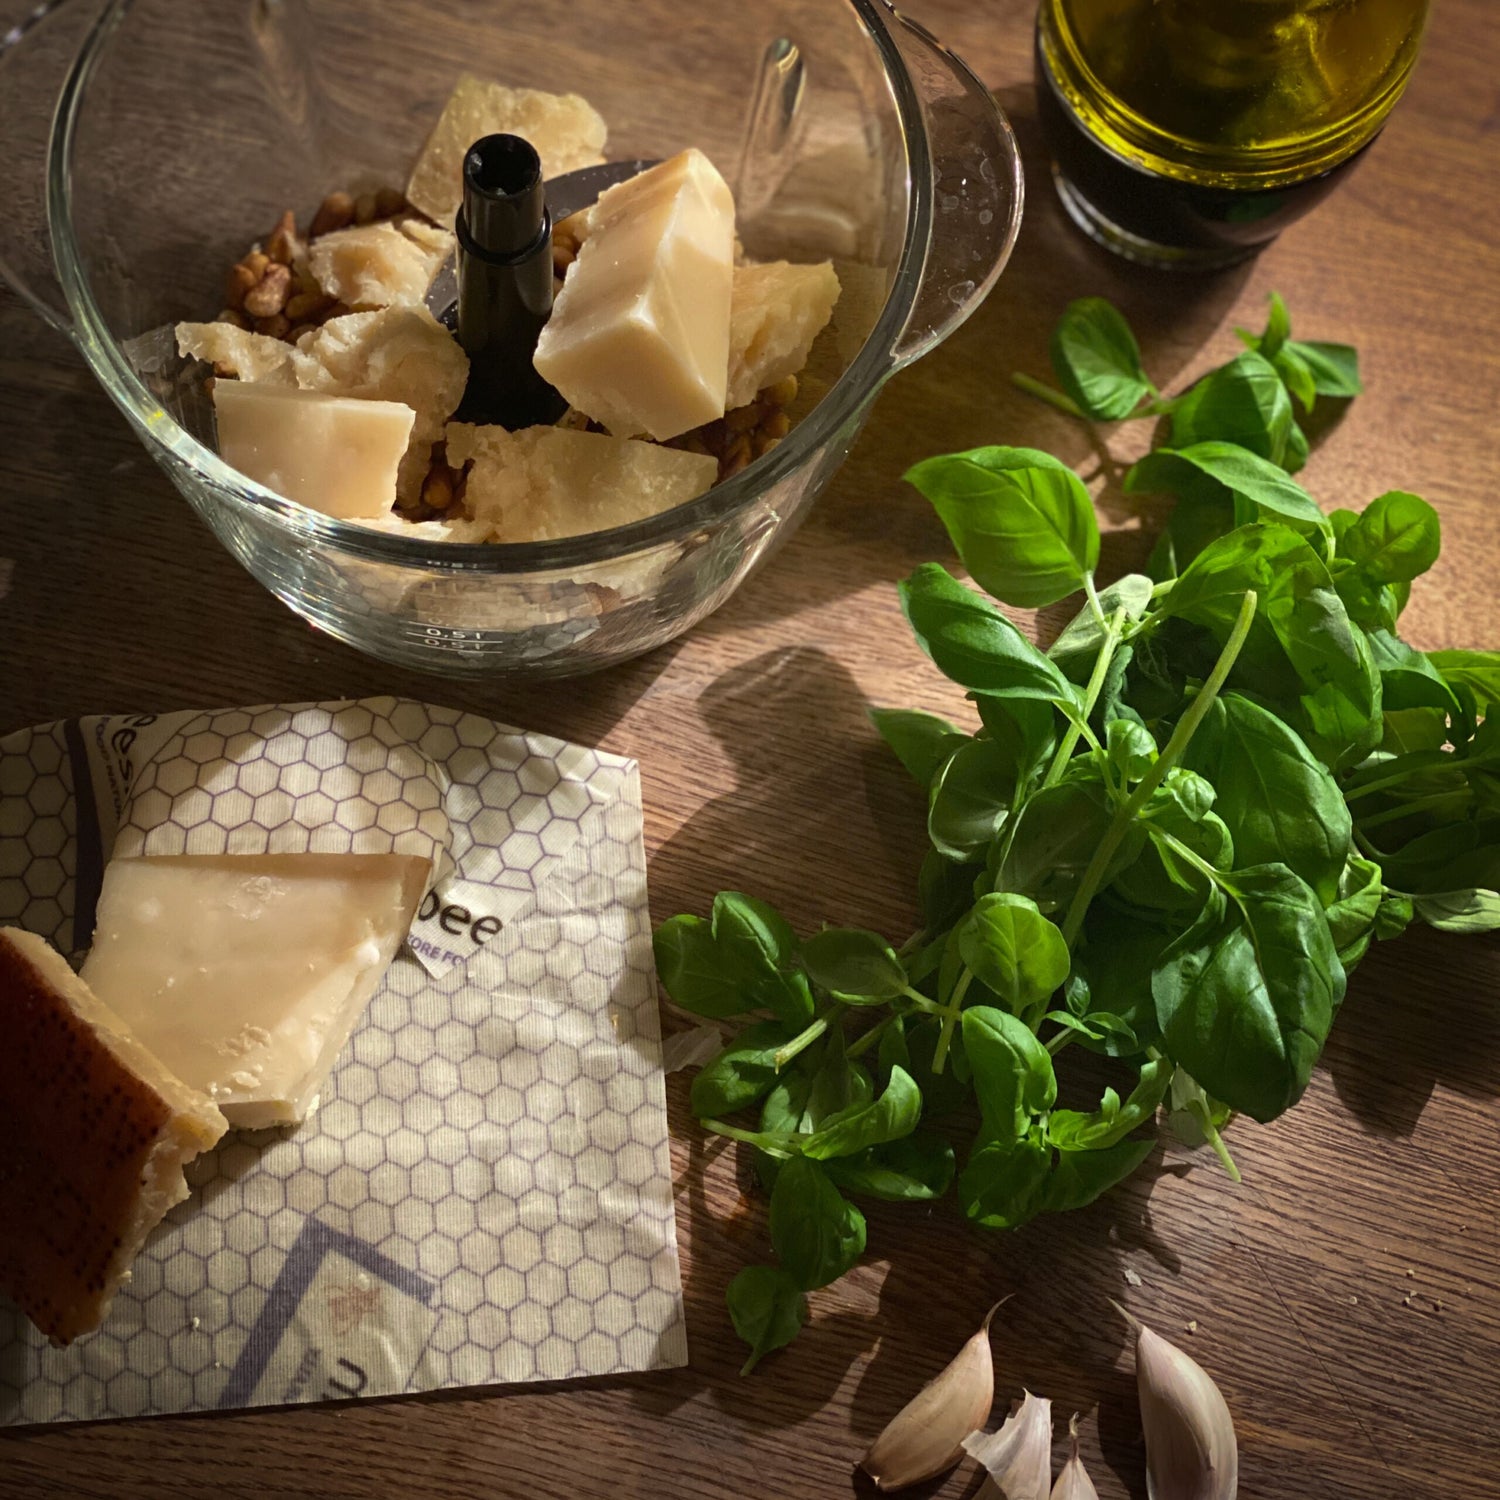 photo showing olive oil bottle, basil, cubed parmesan cheese, and a triangle of parmesan cheese wrapped in beeskin beeswax wraps size L in standard design